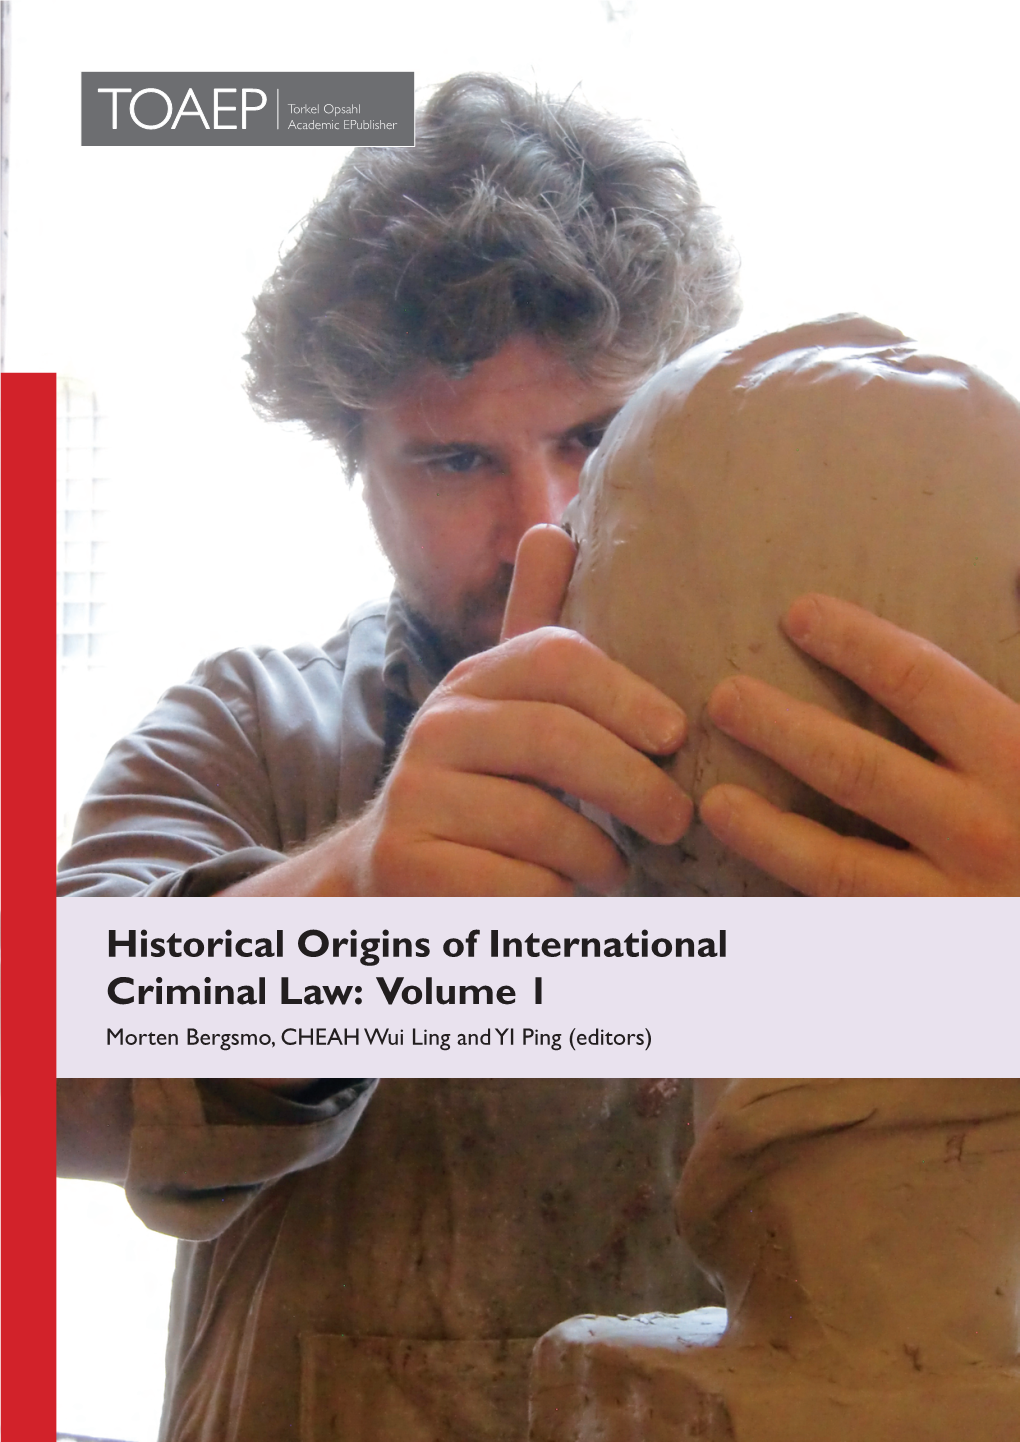 Historical Origins of International Criminal Law: Volume 1 Morten Bergsmo, CHEAH Wui Ling and YI Ping (Editors)